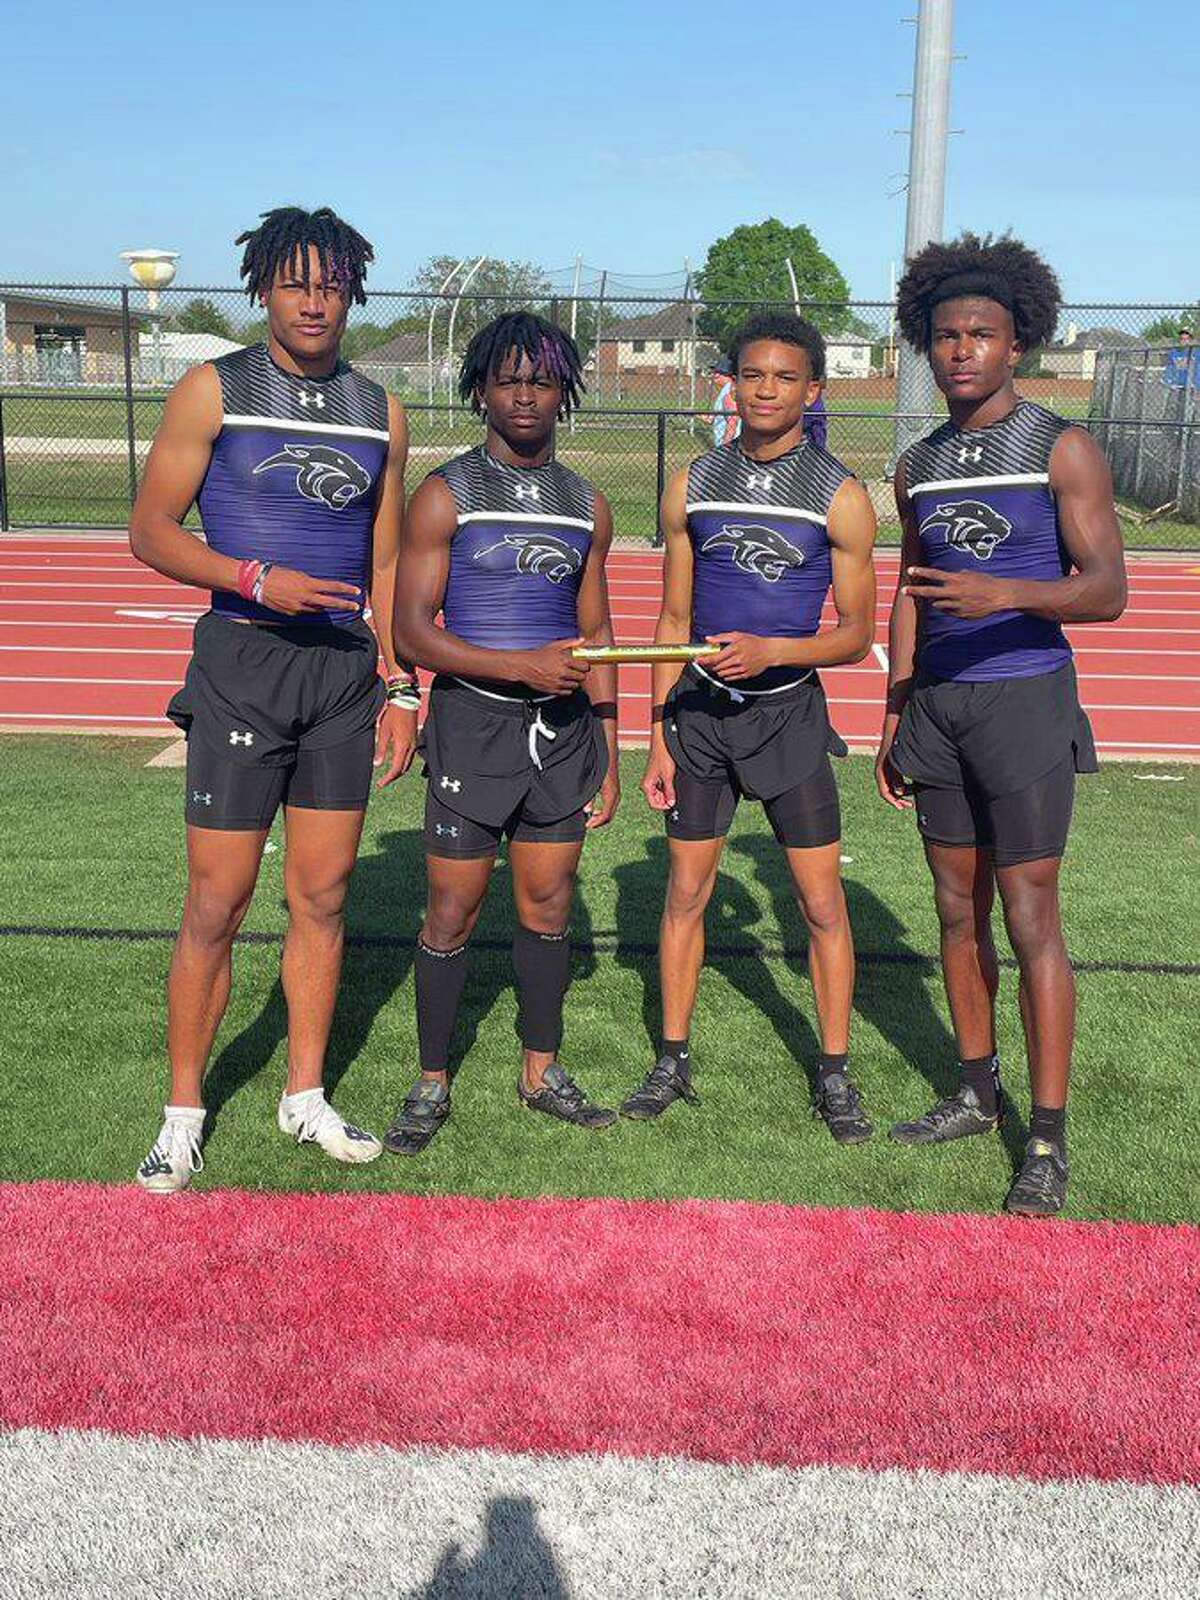 The Ridge Point boys track and field team won the District 20-6A championship, winning 10 events including Karson Gordon, Cayden Broadnax, Kerien Charlo and Bert Emanuel Jr. in the 400-meter relay.